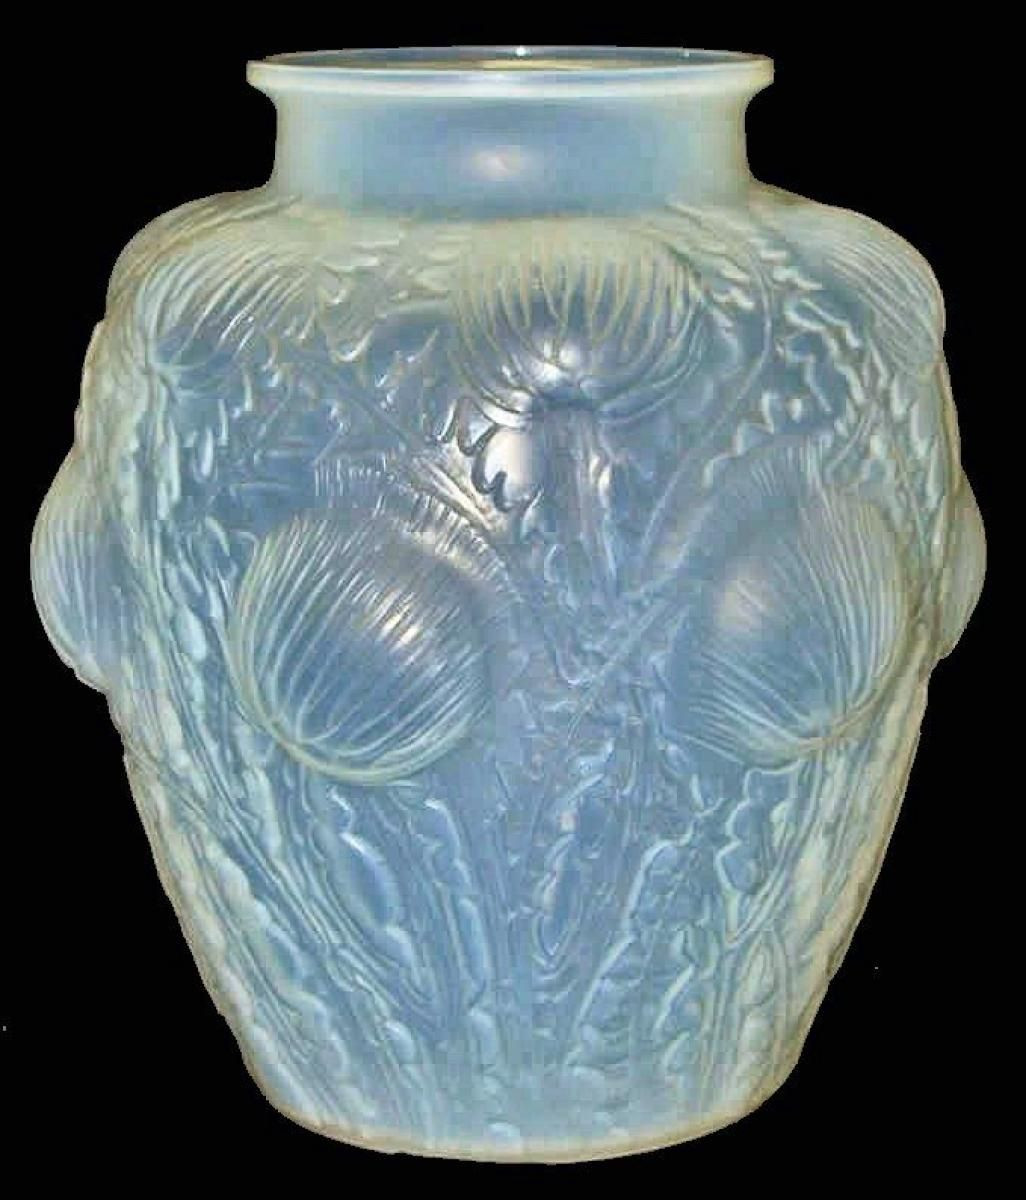 20 Elegant Lalique Vases Images 2024 free download lalique vases images of r lalique vase art daco opalescent lalique pinterest with r lalique vase art daco opalescent galerie tramway